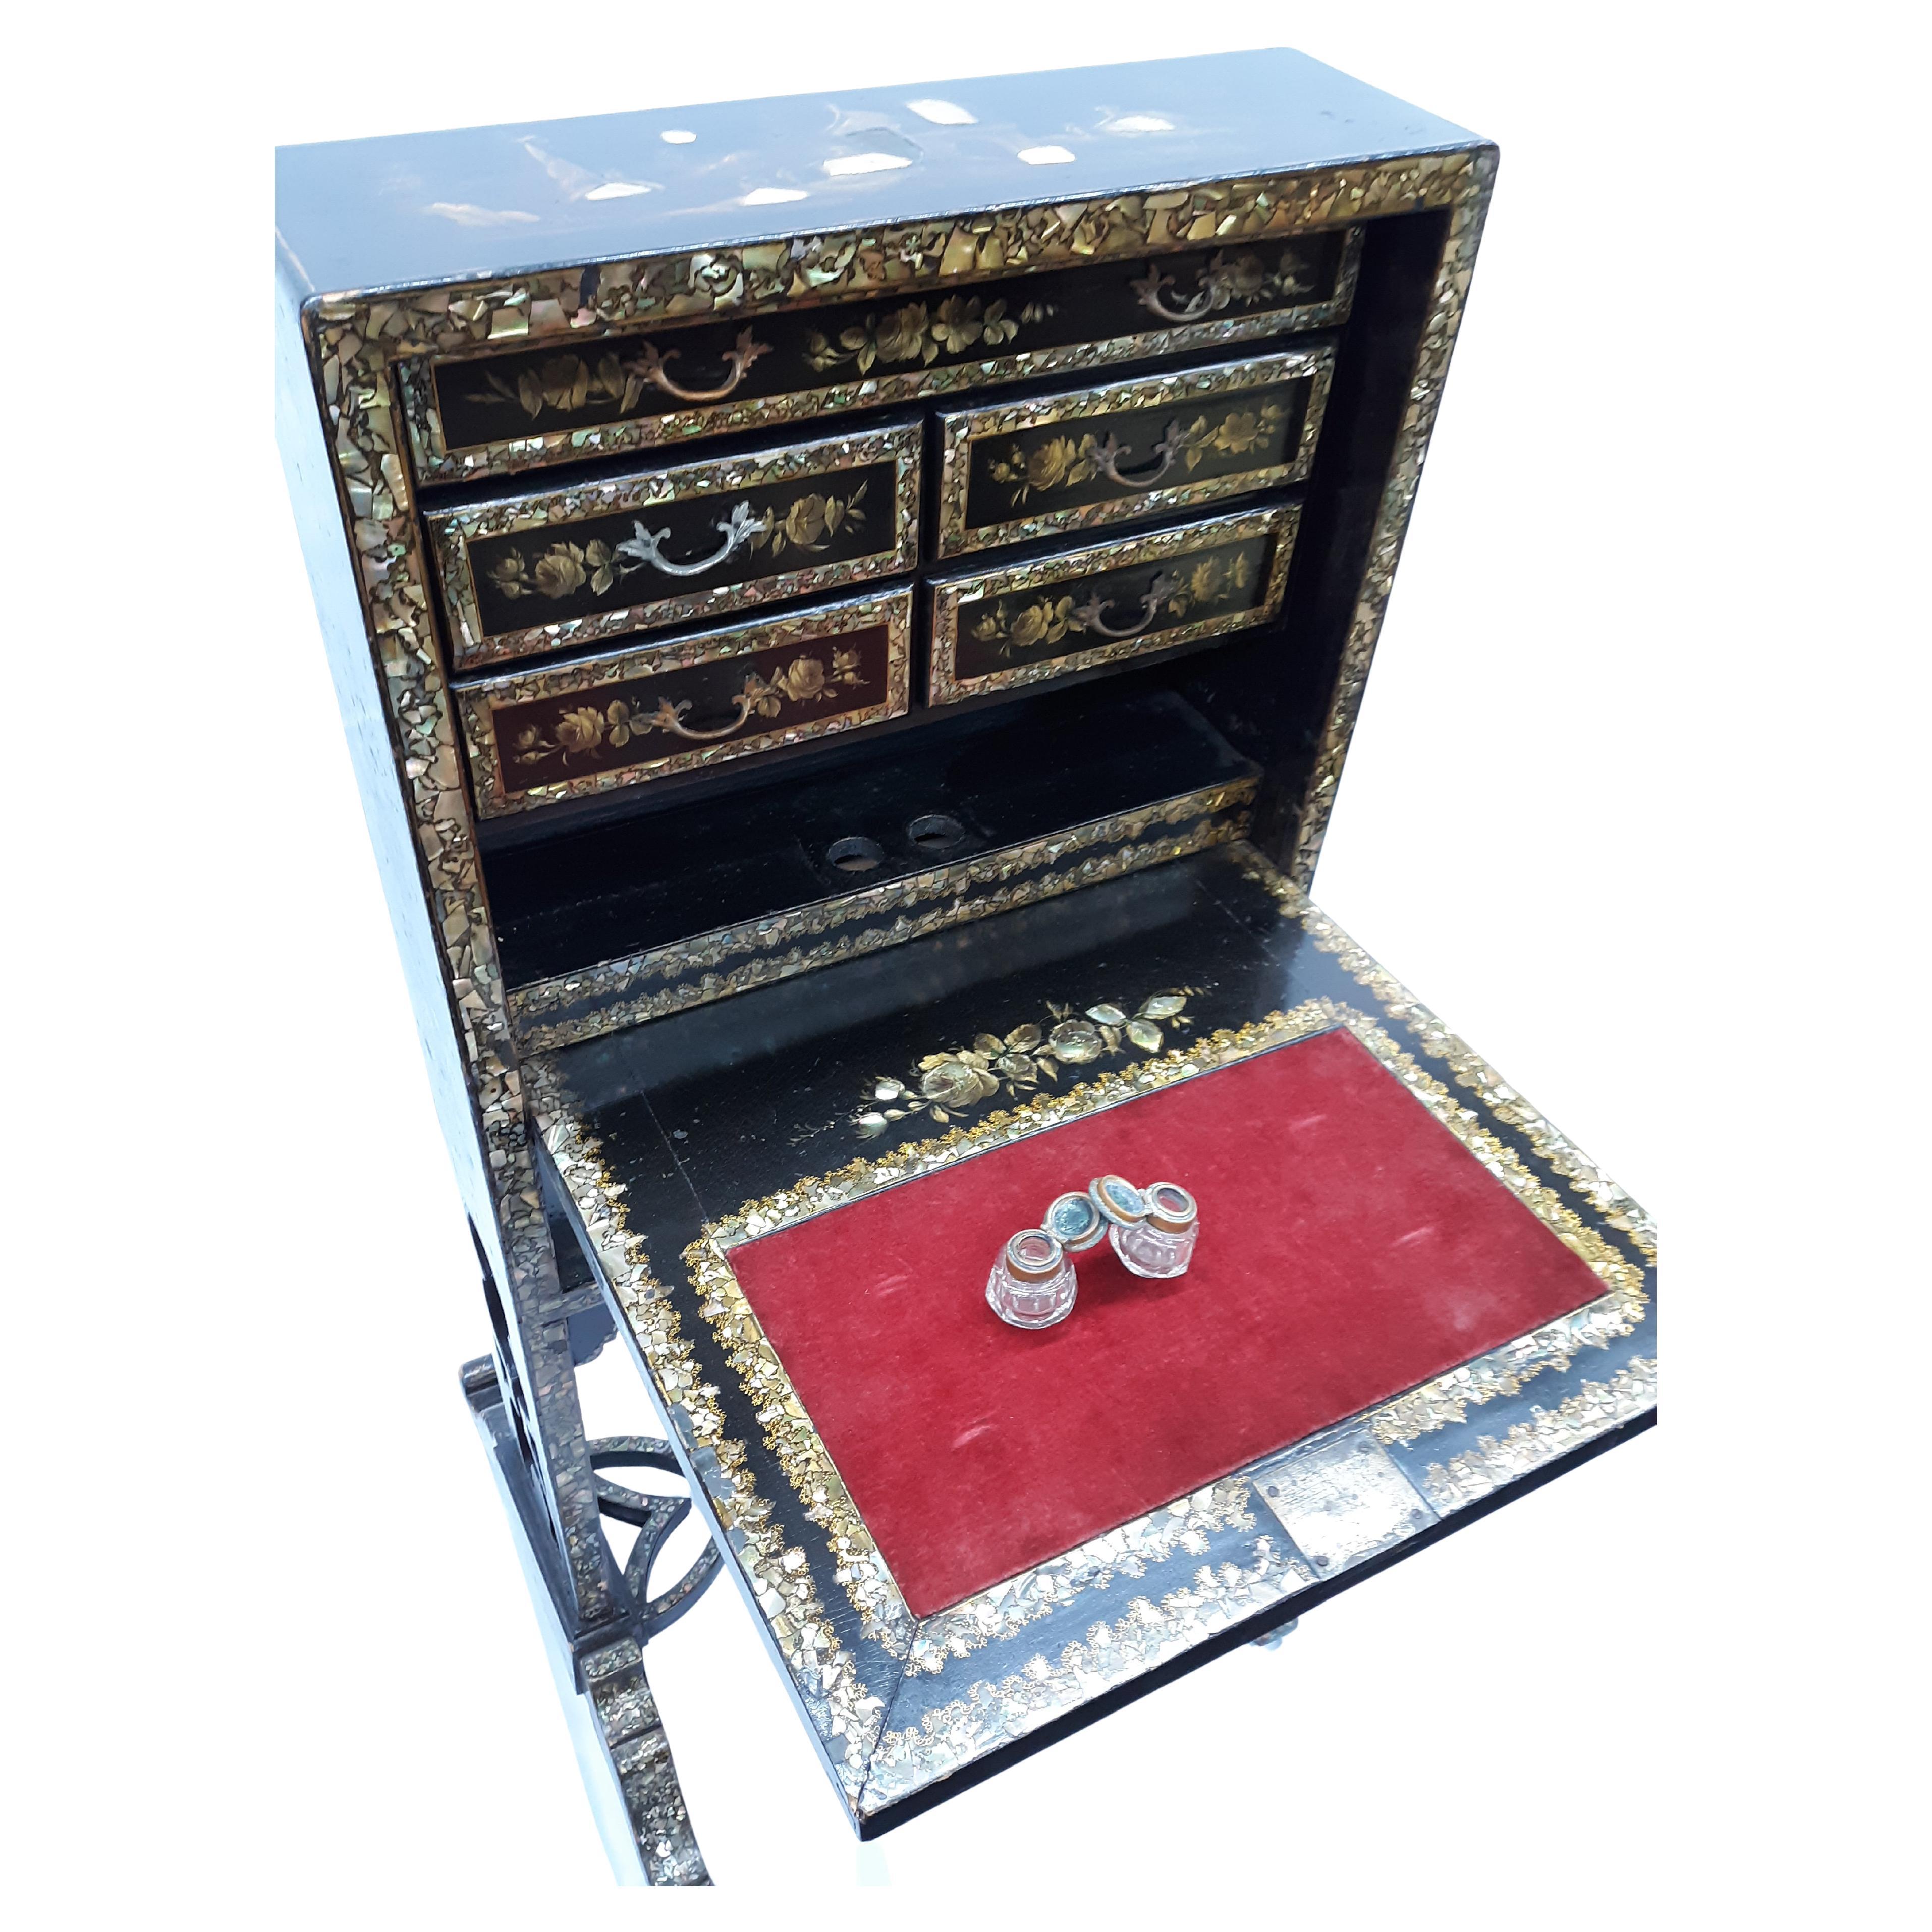 This Incredibly Rare 1800 Ladies Perfume and Makeup Table with Inlaid Amber Stone Design is breathtaking in its quality and rarity. The craftsmanship is obvious from every angle. Individual drawers, and ink/perfume wells. All preserved in original